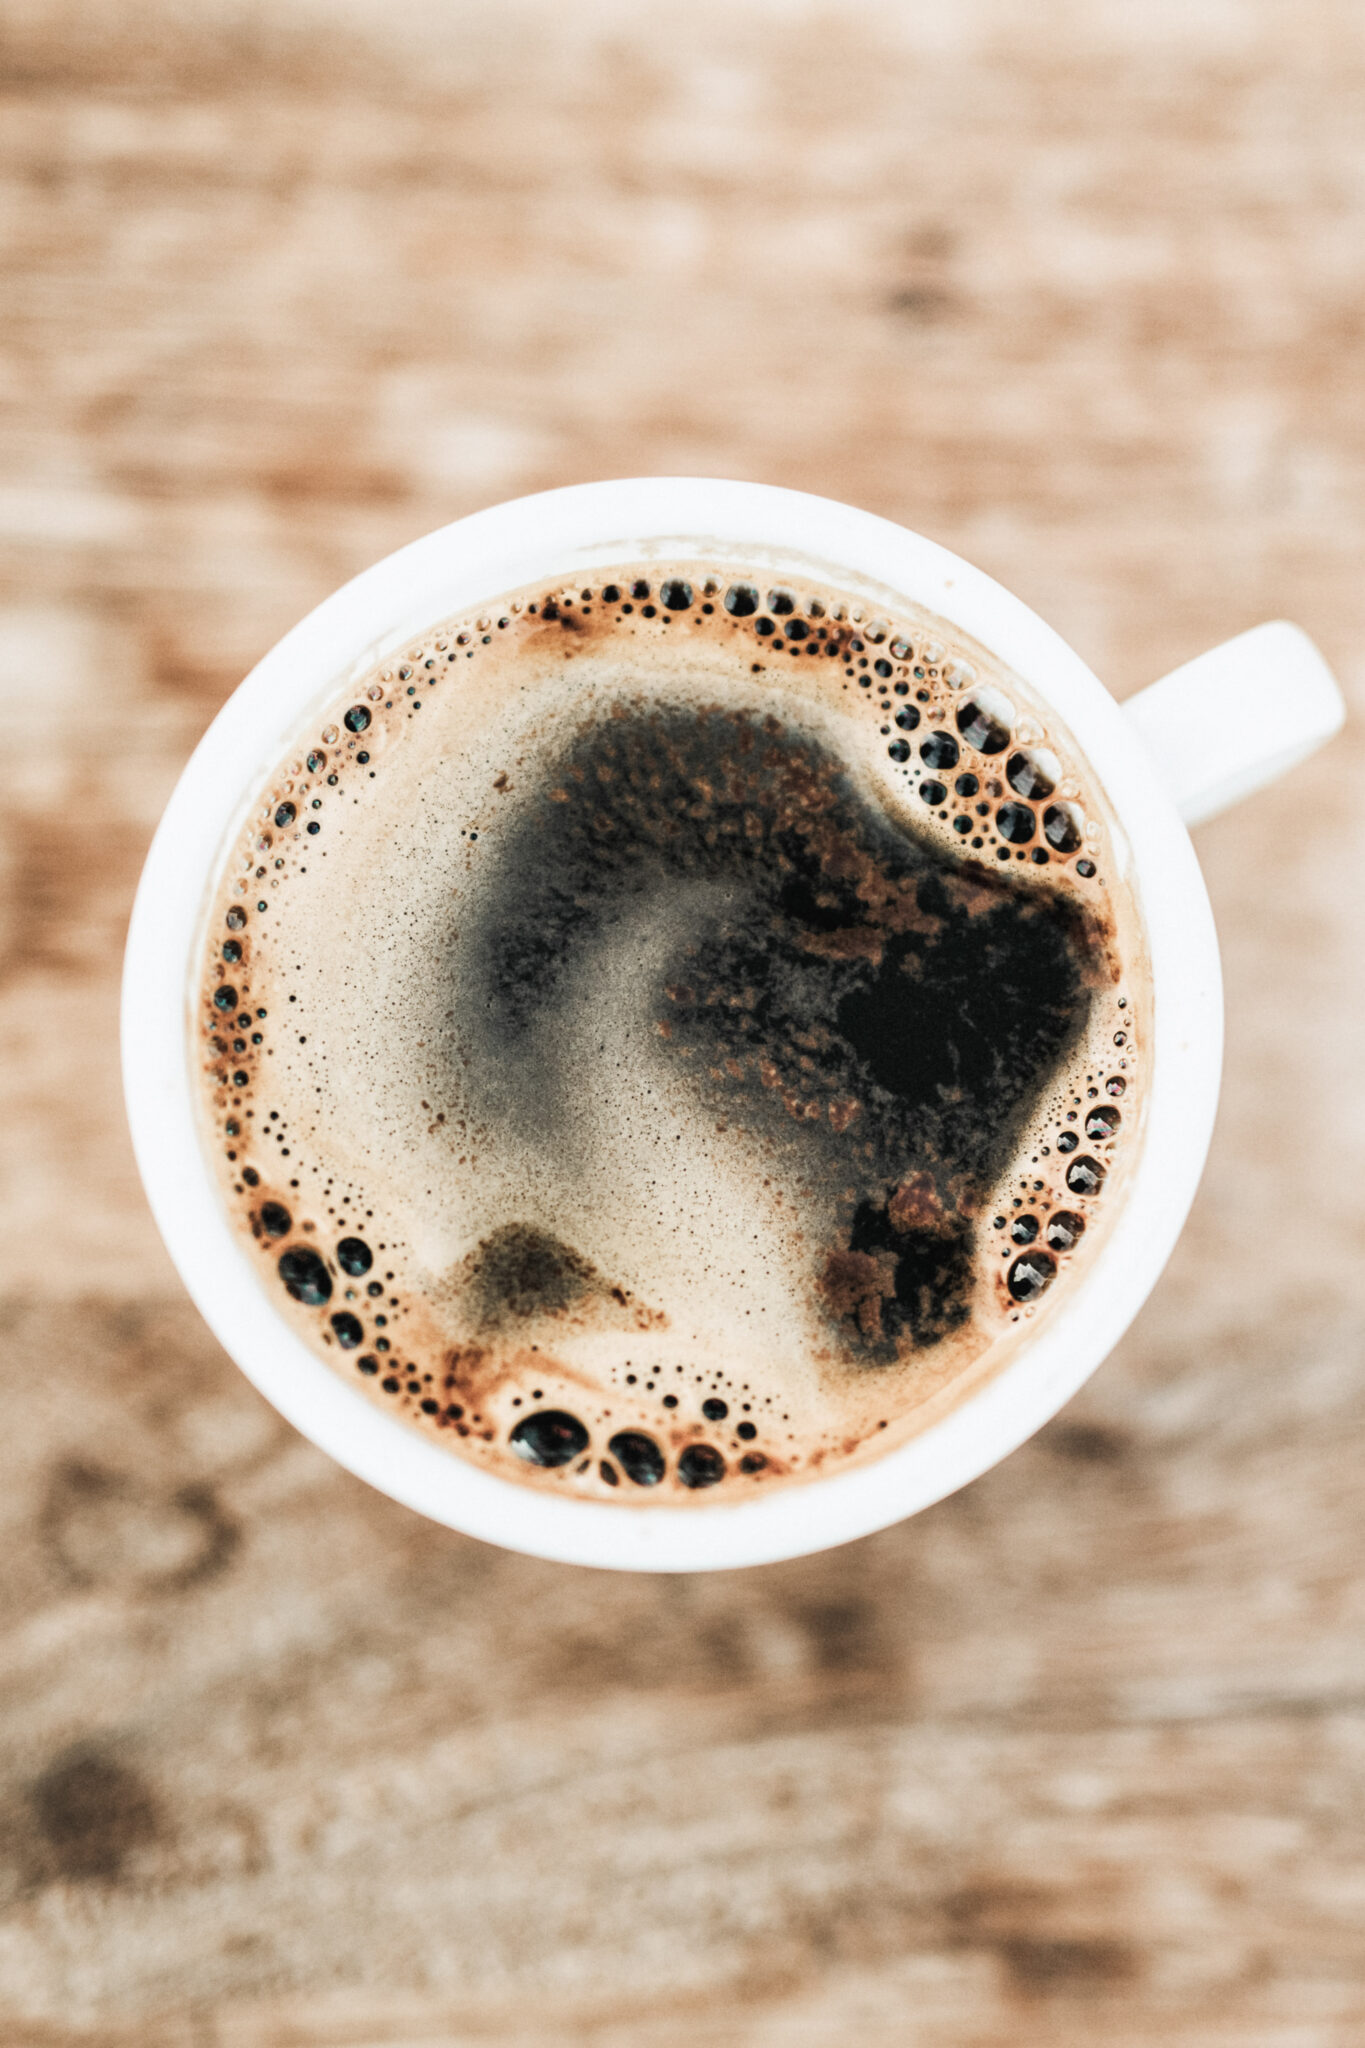 A top view of a freshly brewed cup of black coffee. This article covers what coffee you should drink based on your mood.